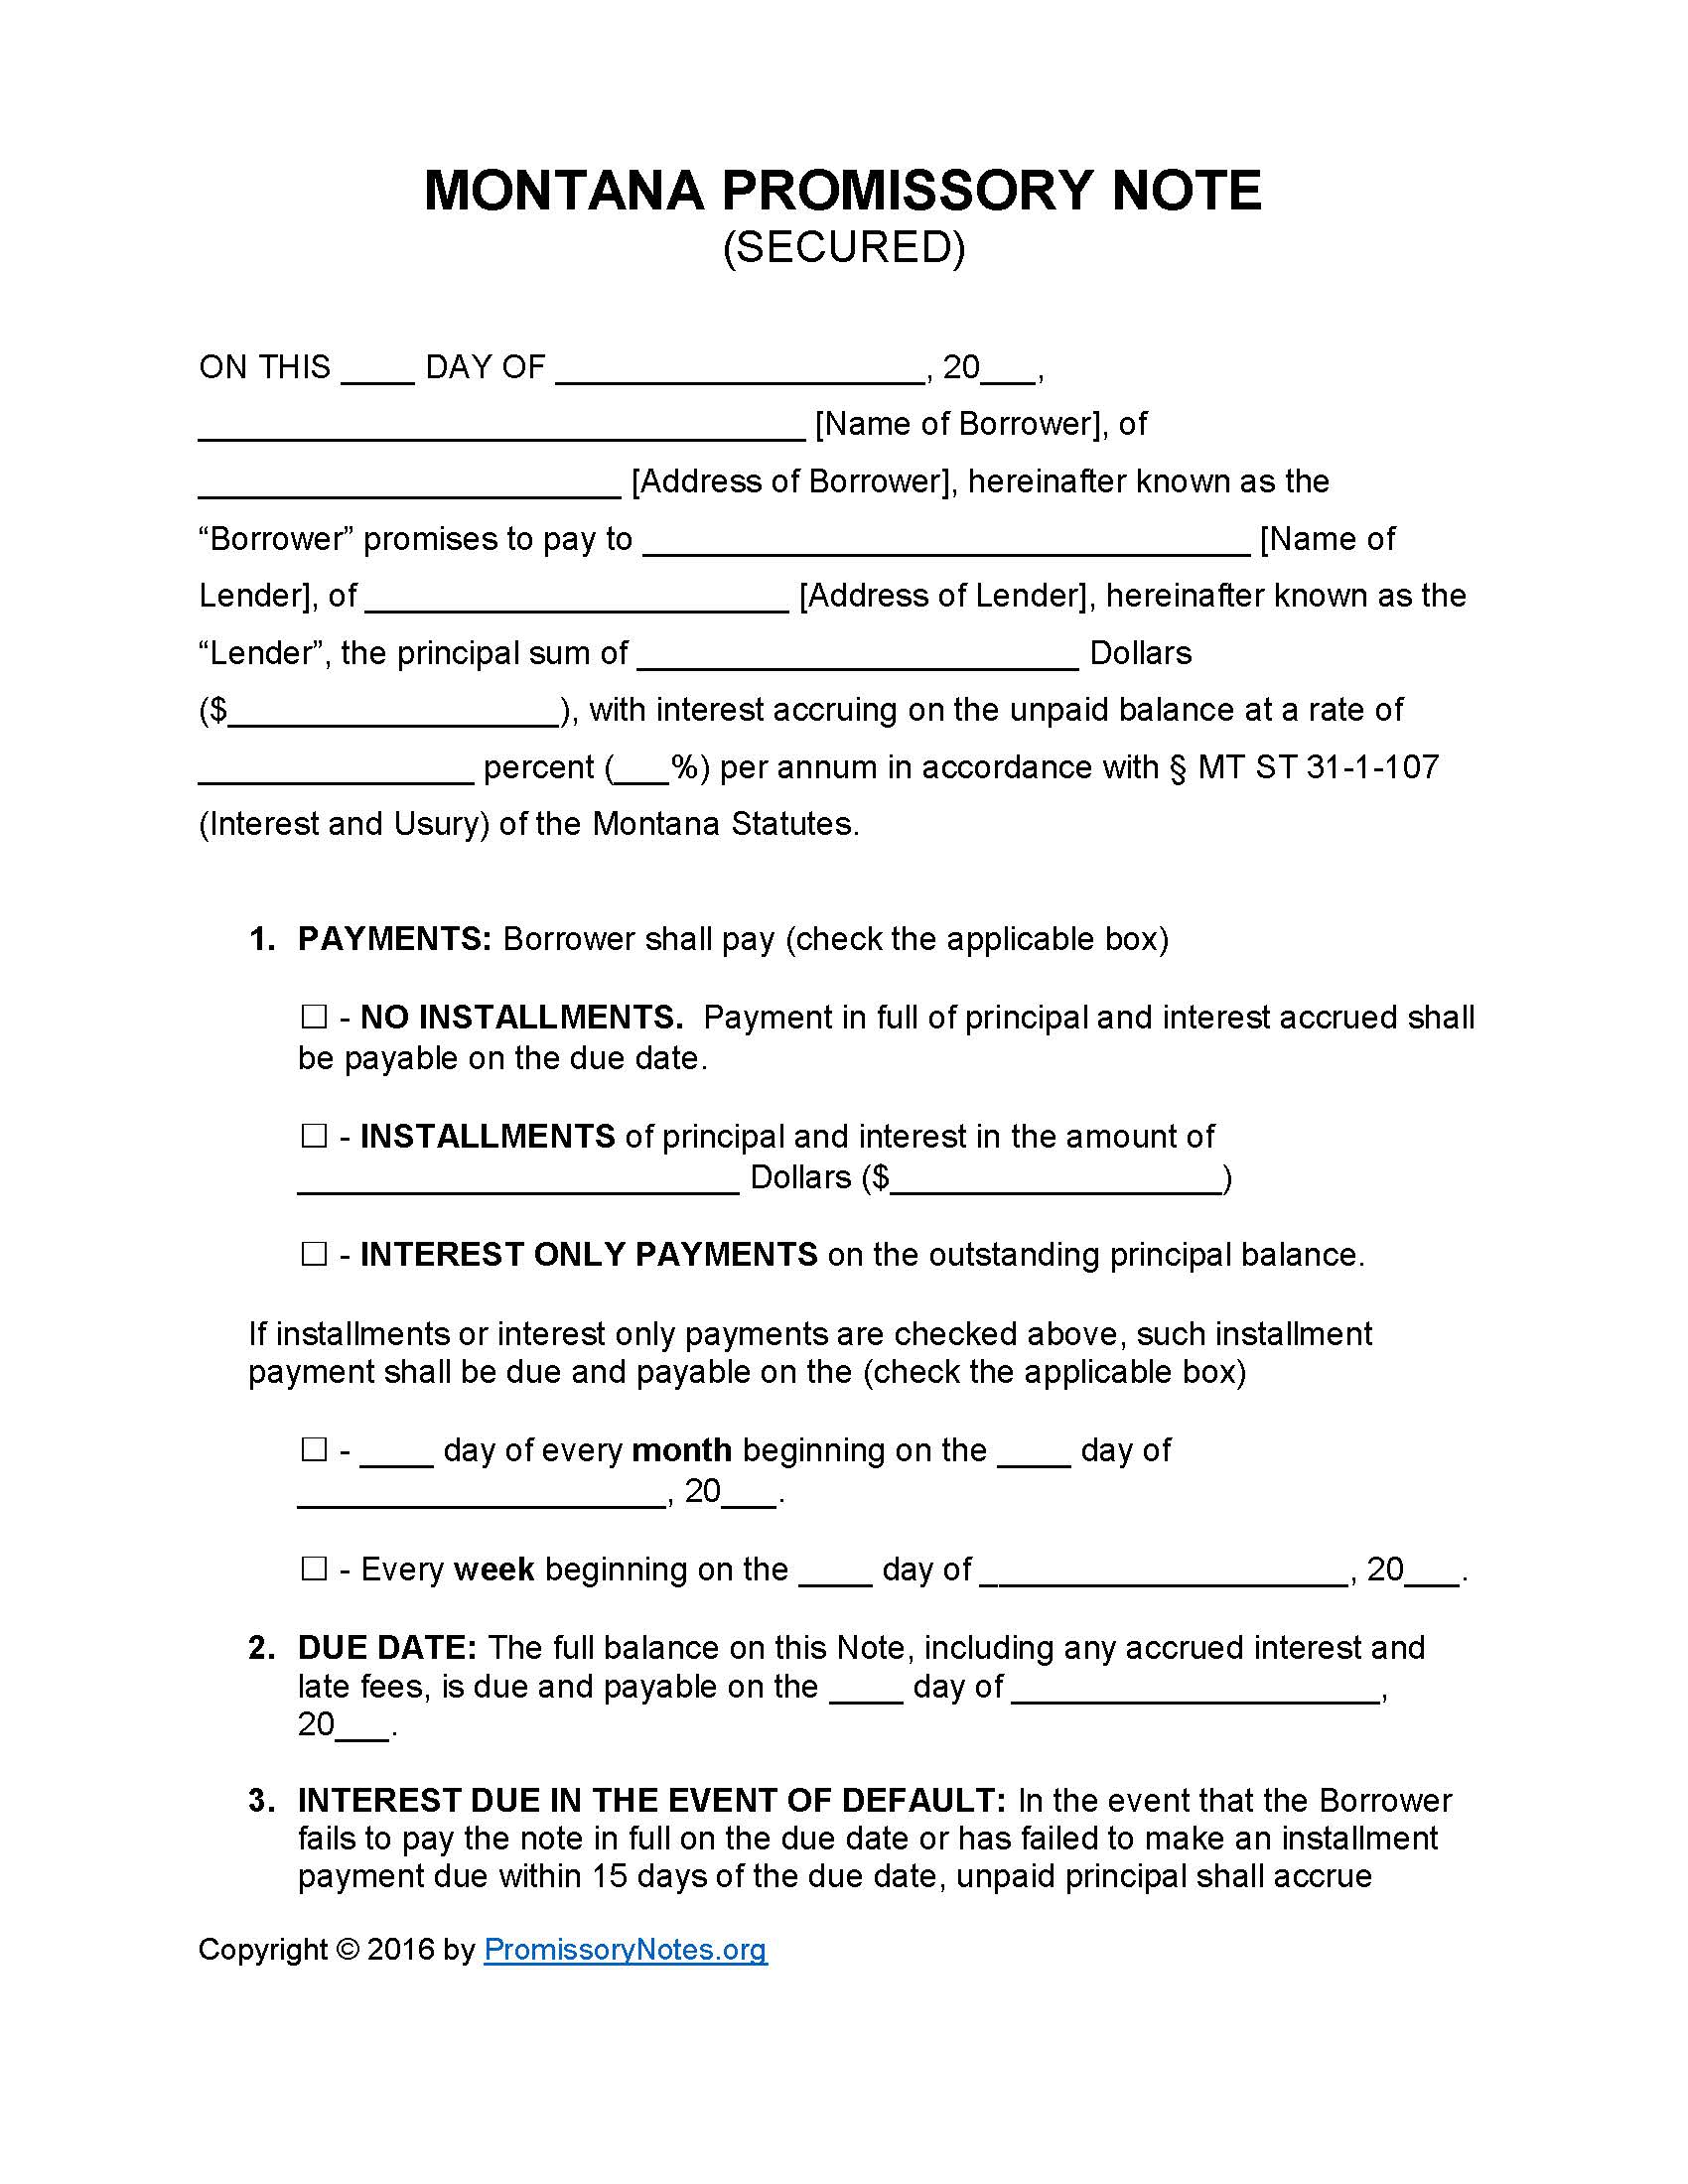 montana-secured-promissory-note-form